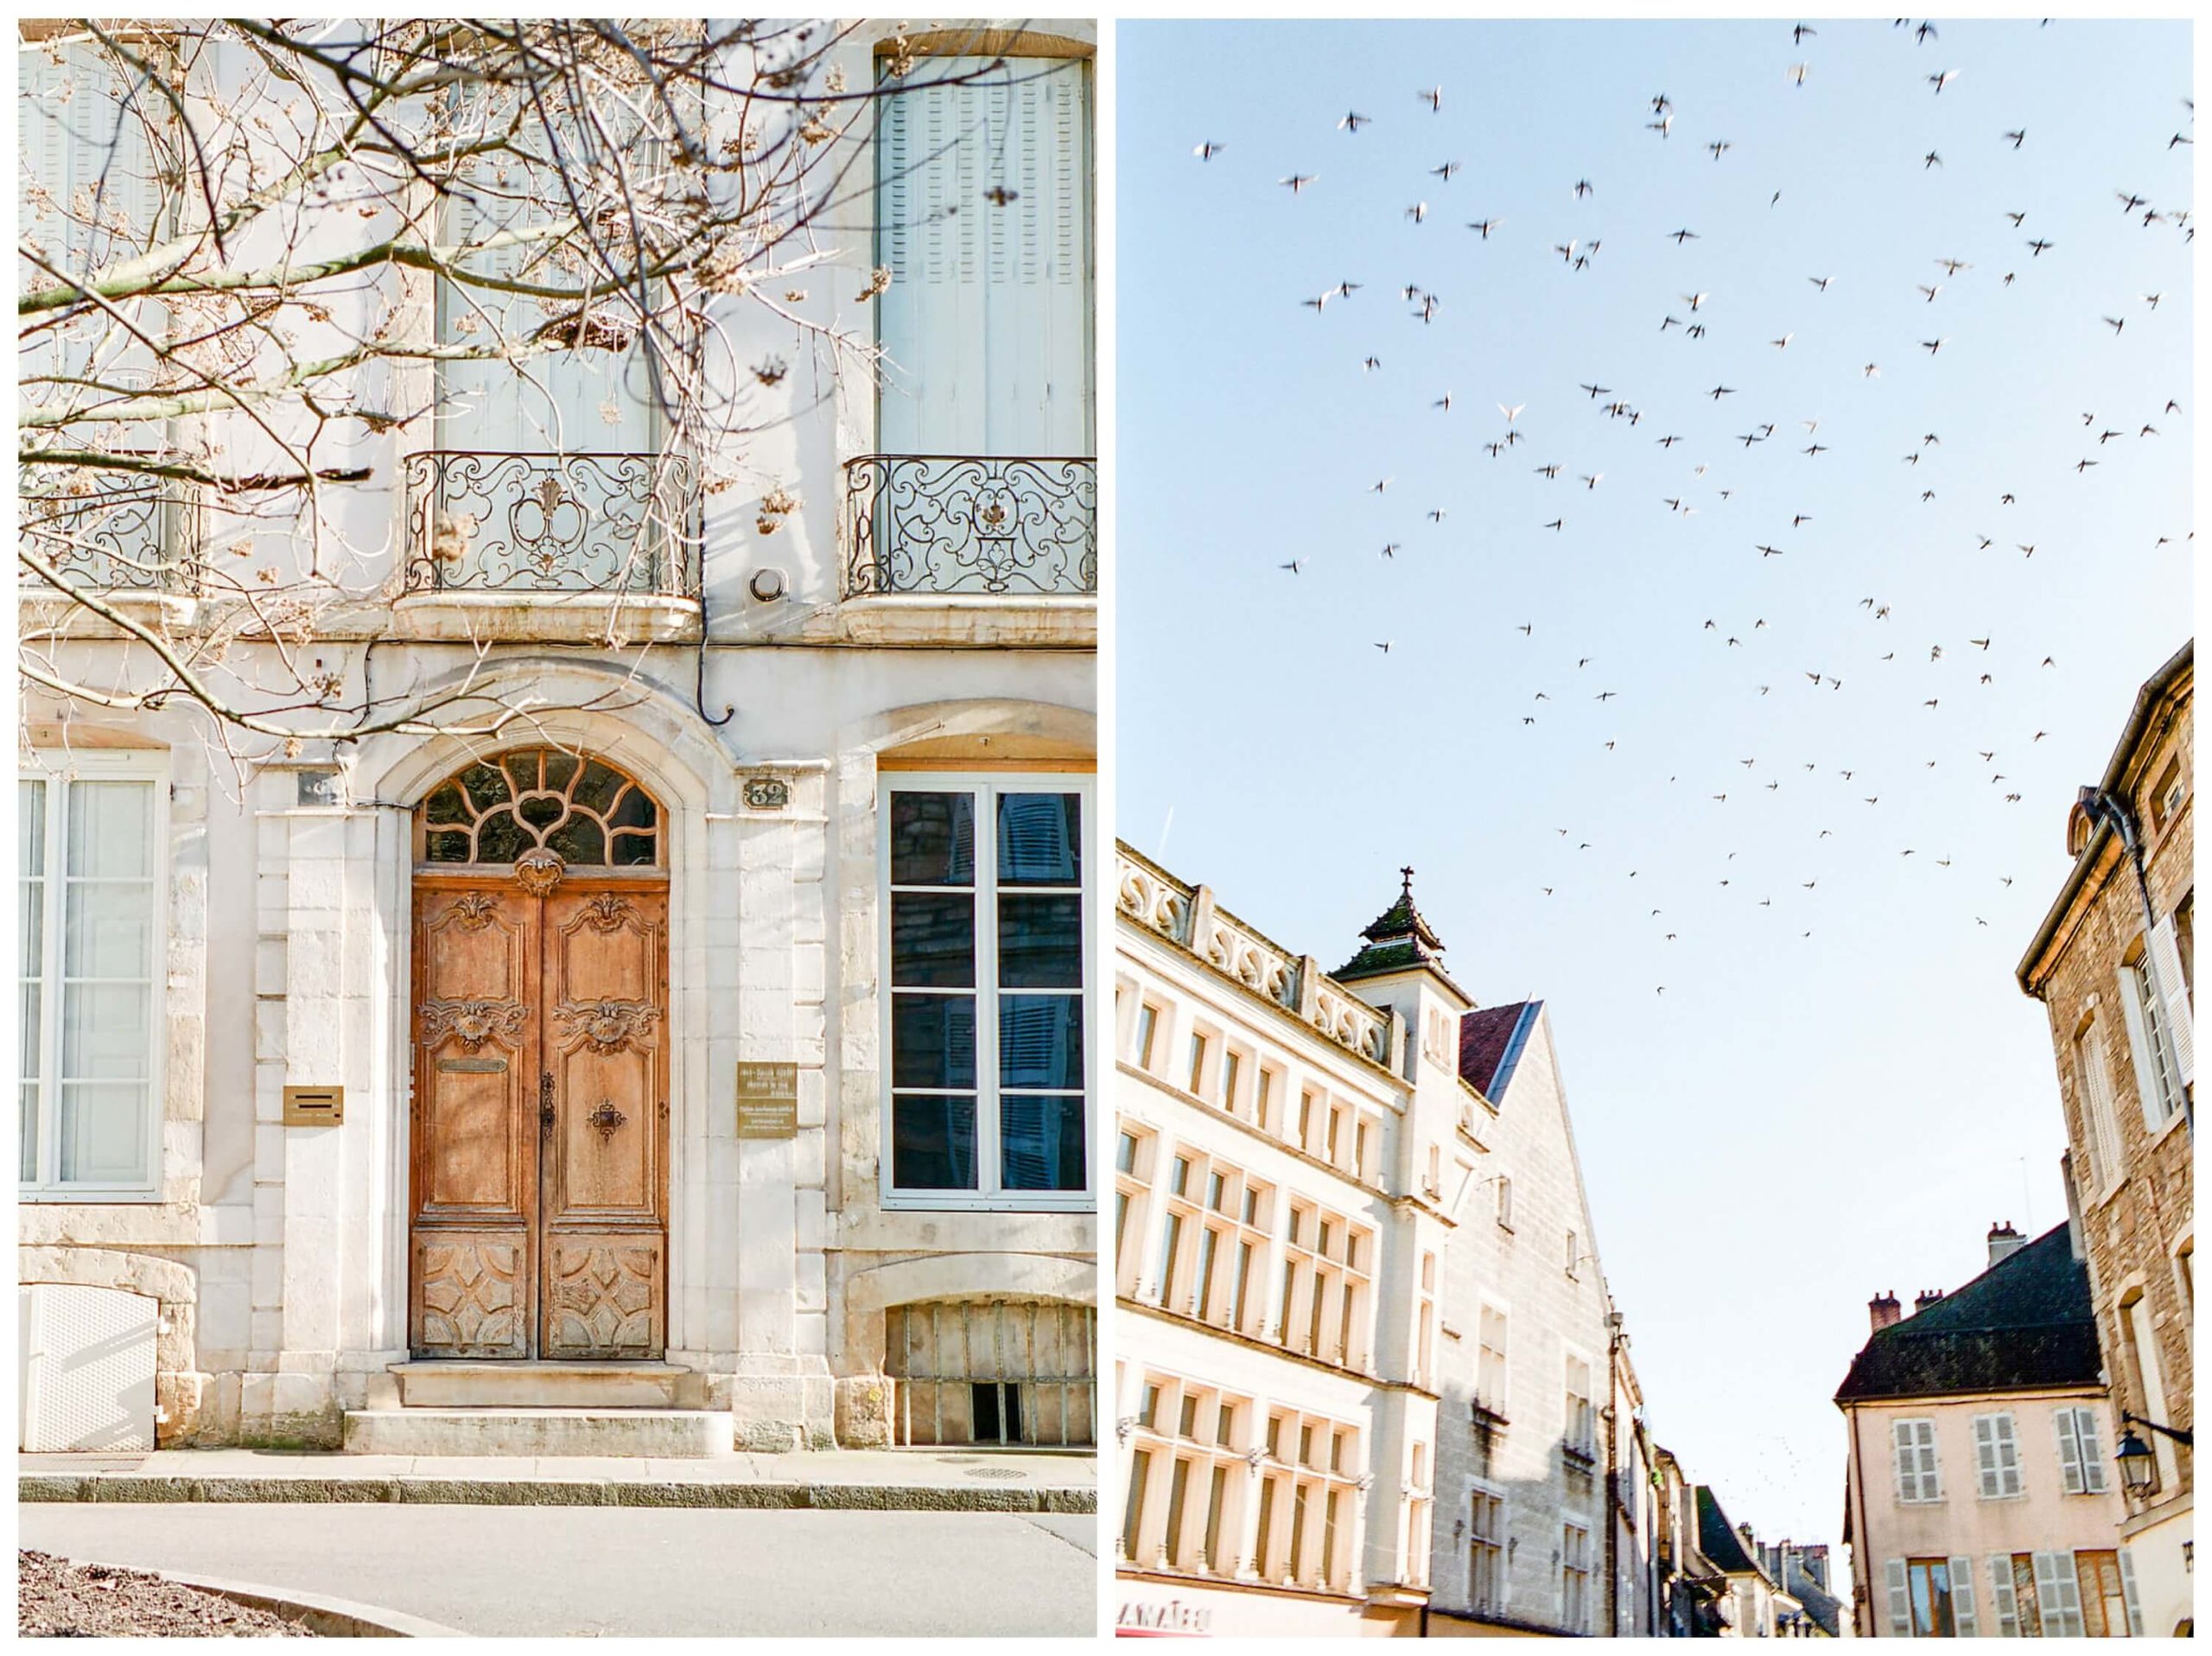 left: beautiful door in the beaune city center right: a flock of birds take flight over the rooftops of beaune, france